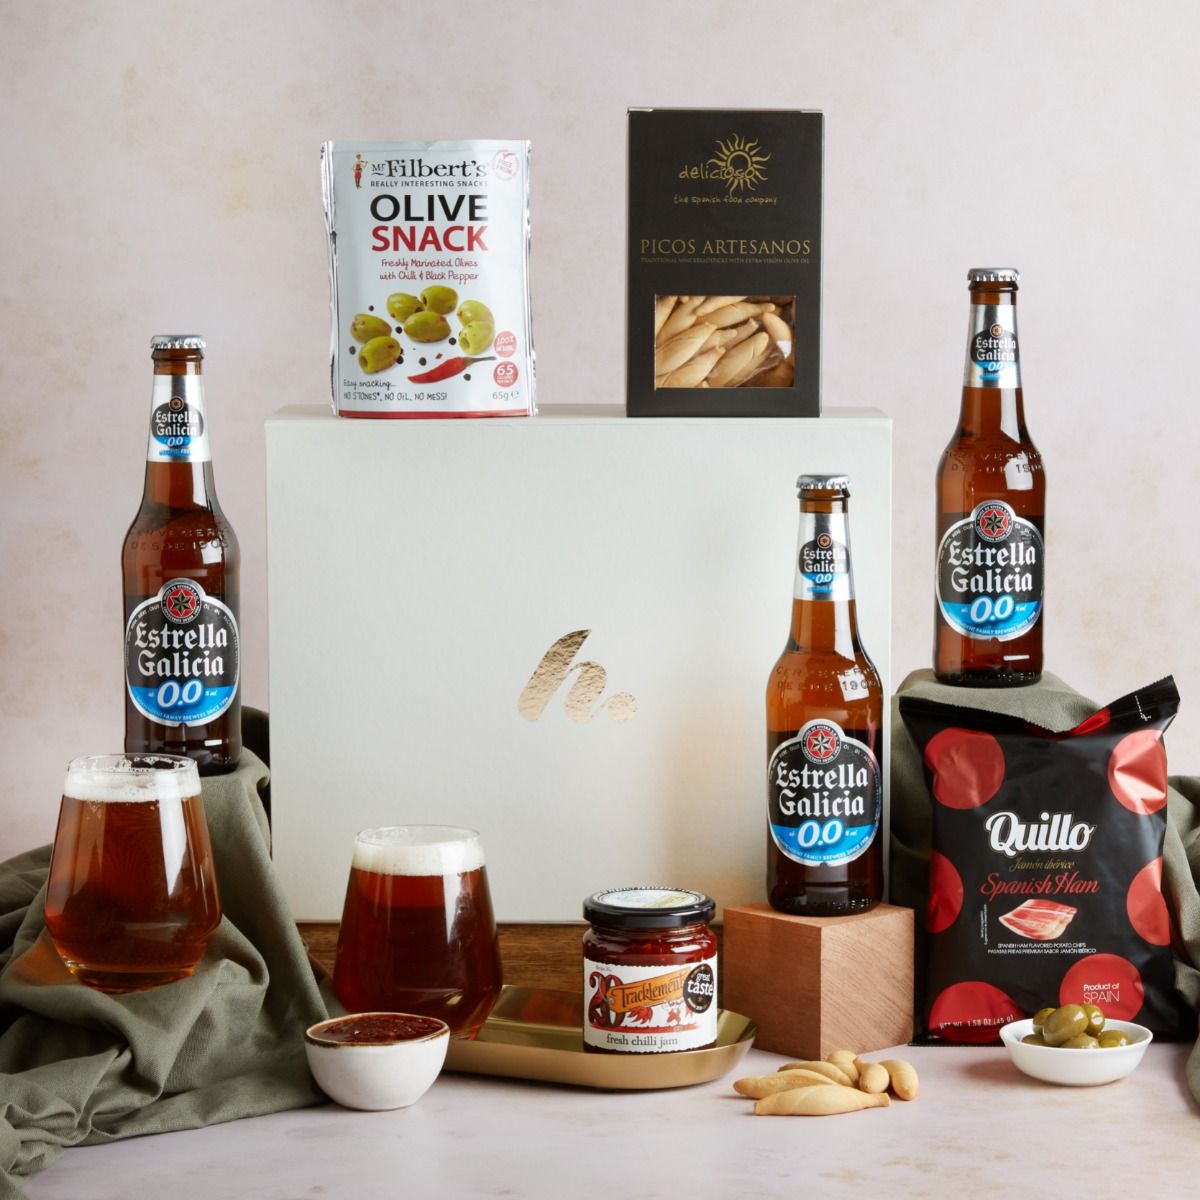 The Alcohol Free Beer Hamper with contents on display